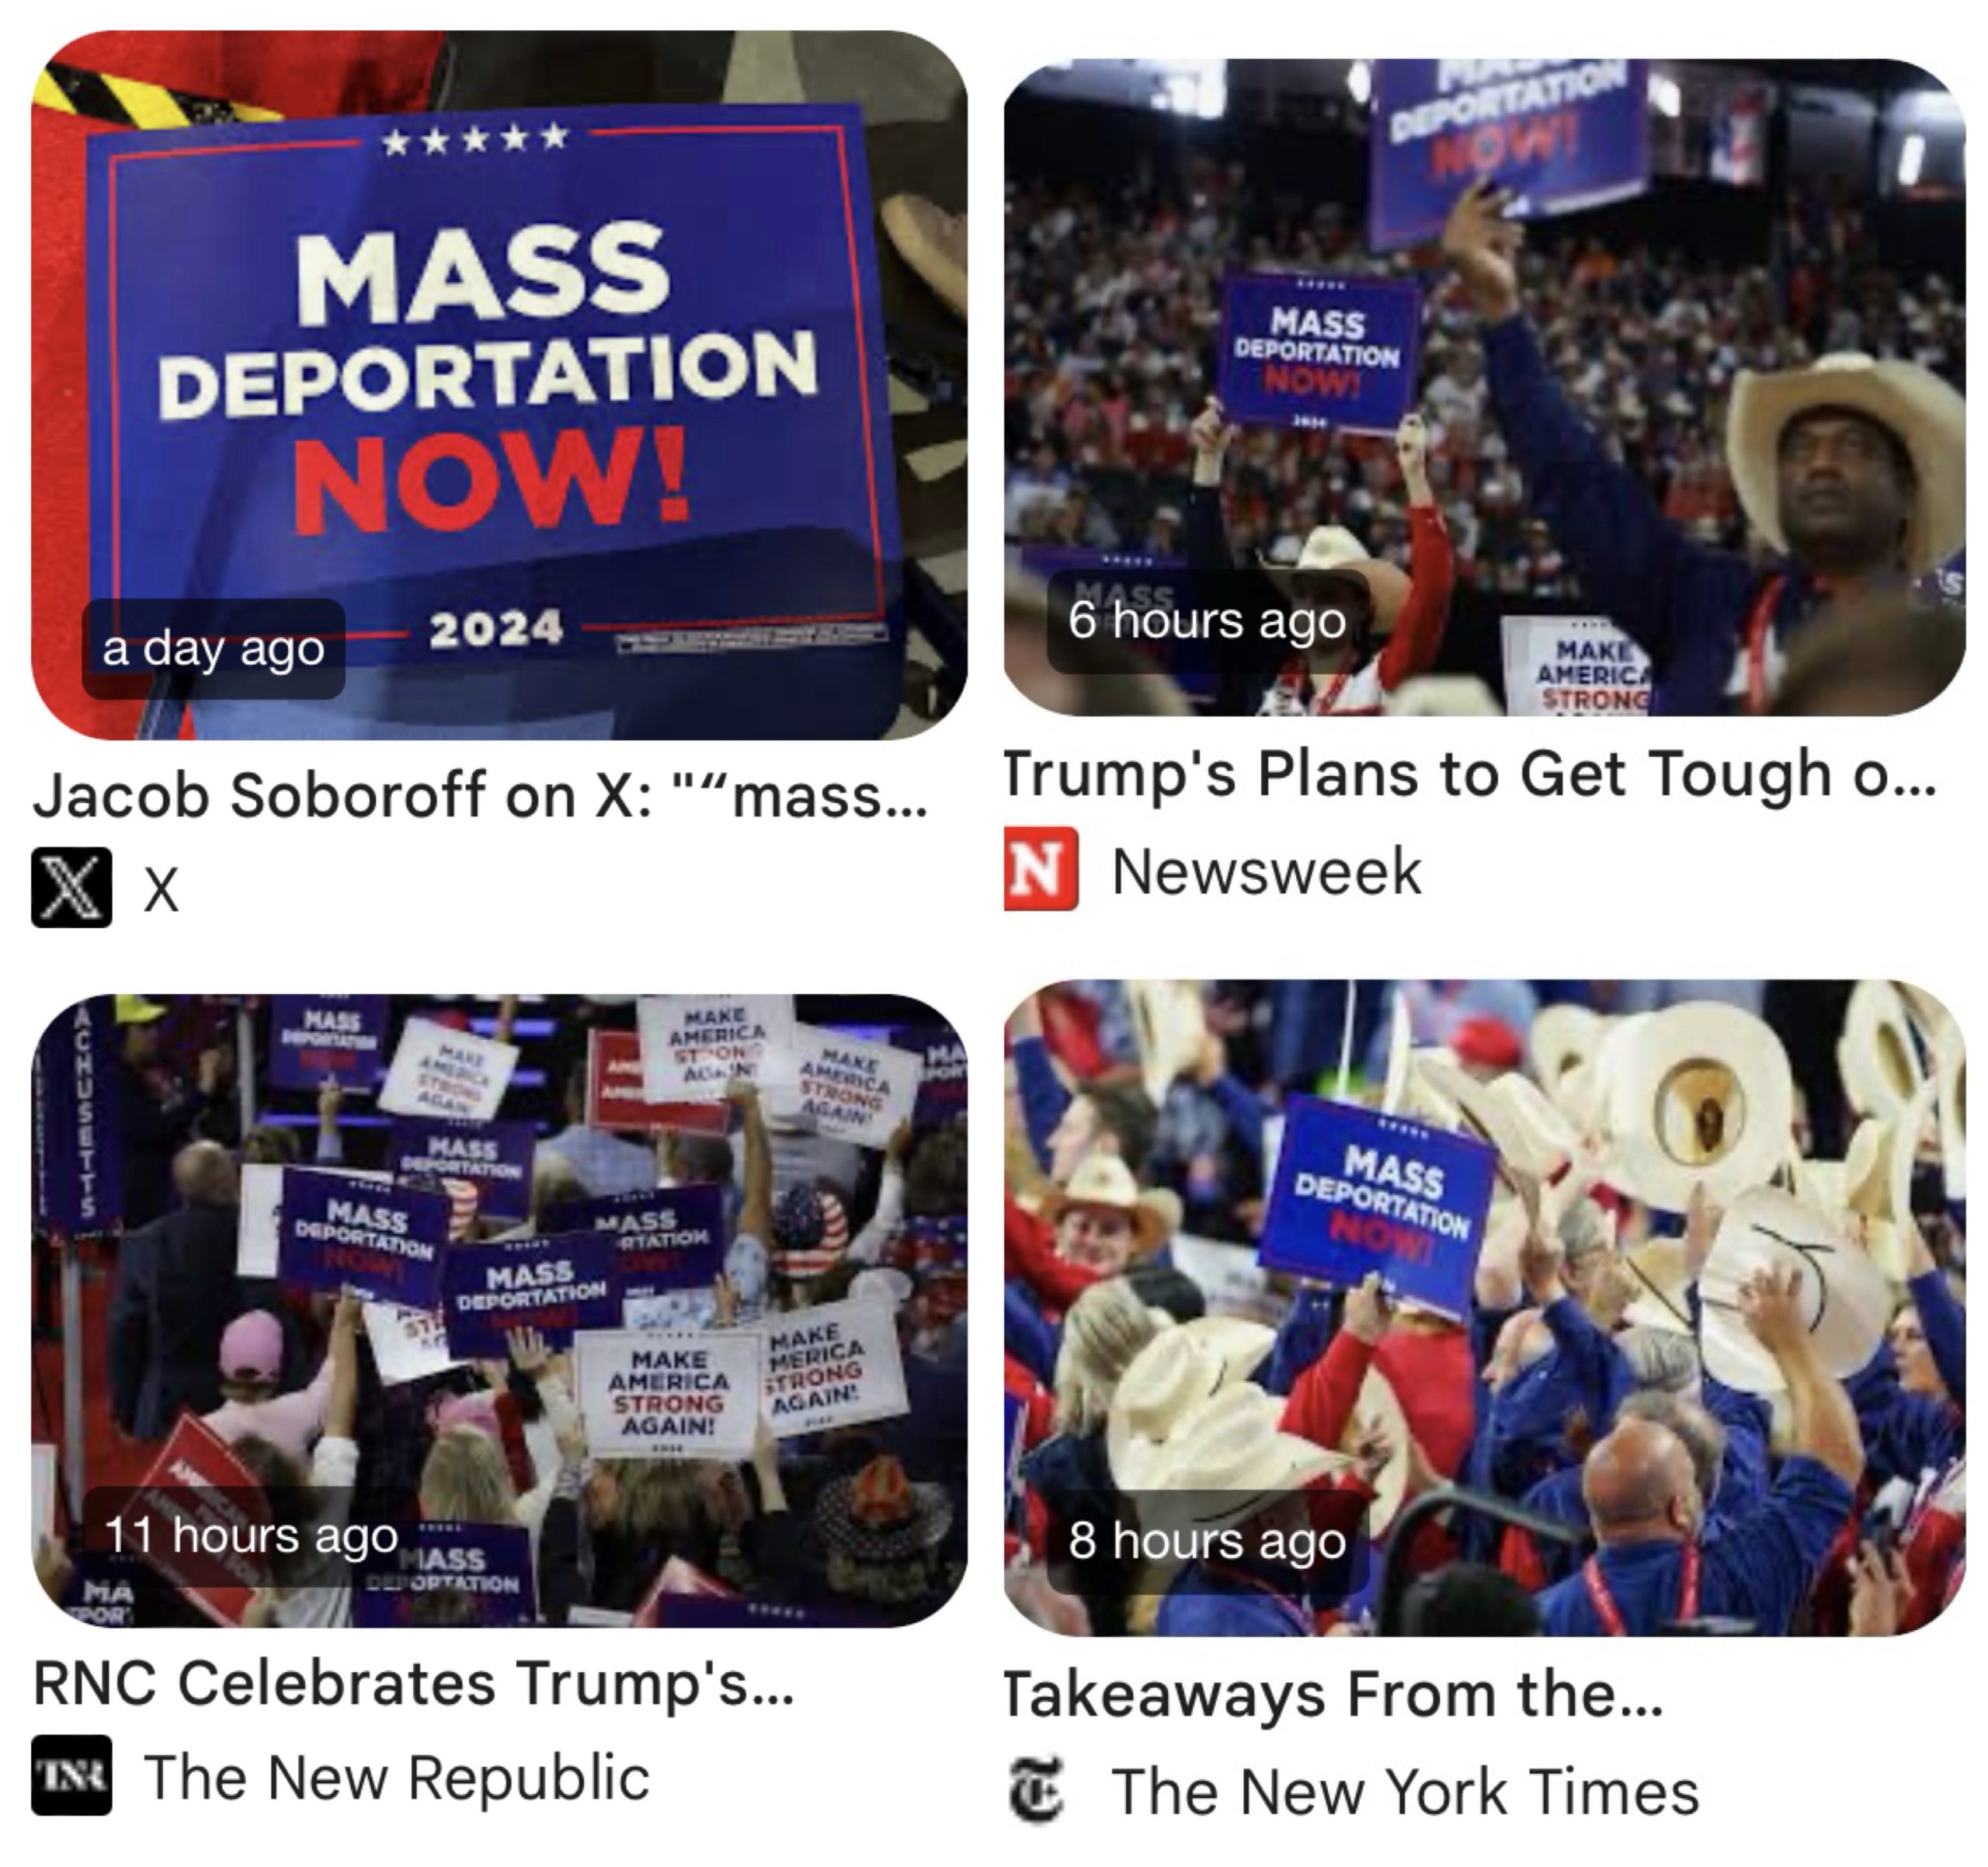 Who paid for these ‘Mass Deportation Now’ signs?